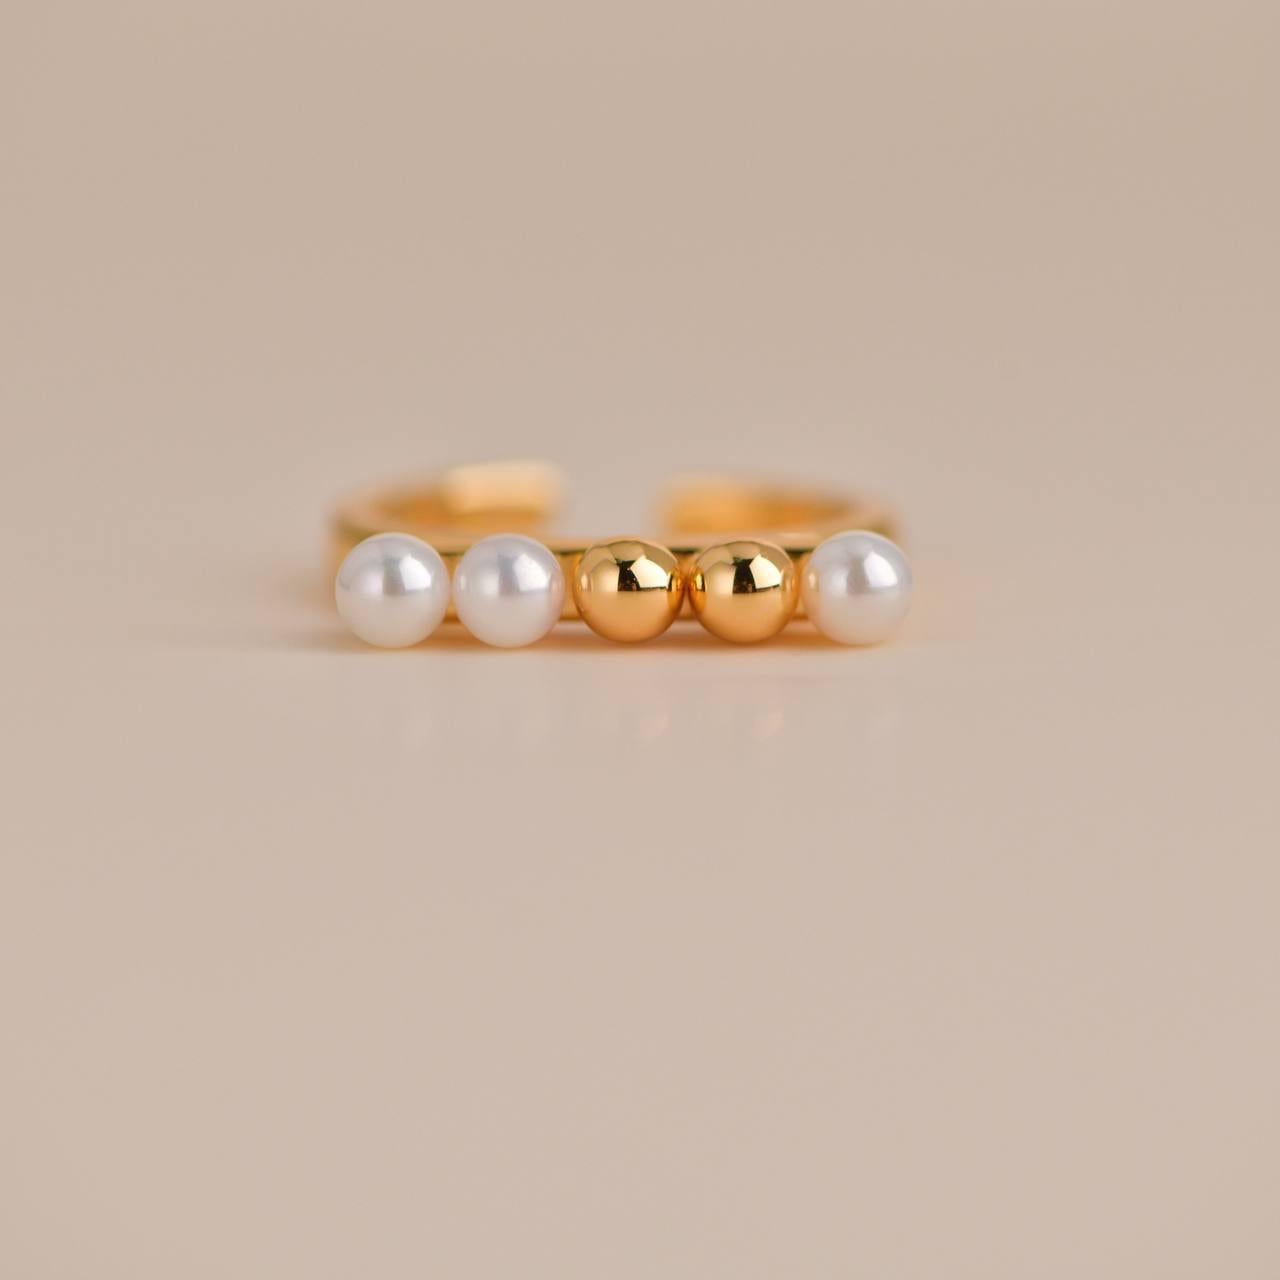 SKU: FT-0001
Material 18K Gold Vermeil and Freshwater Pearl
Diameter approx. 20mm
Ring Width approx. 8mm
Freshwater Pearl beads approx. 4mm; gold vermeil beads approx. 4mm